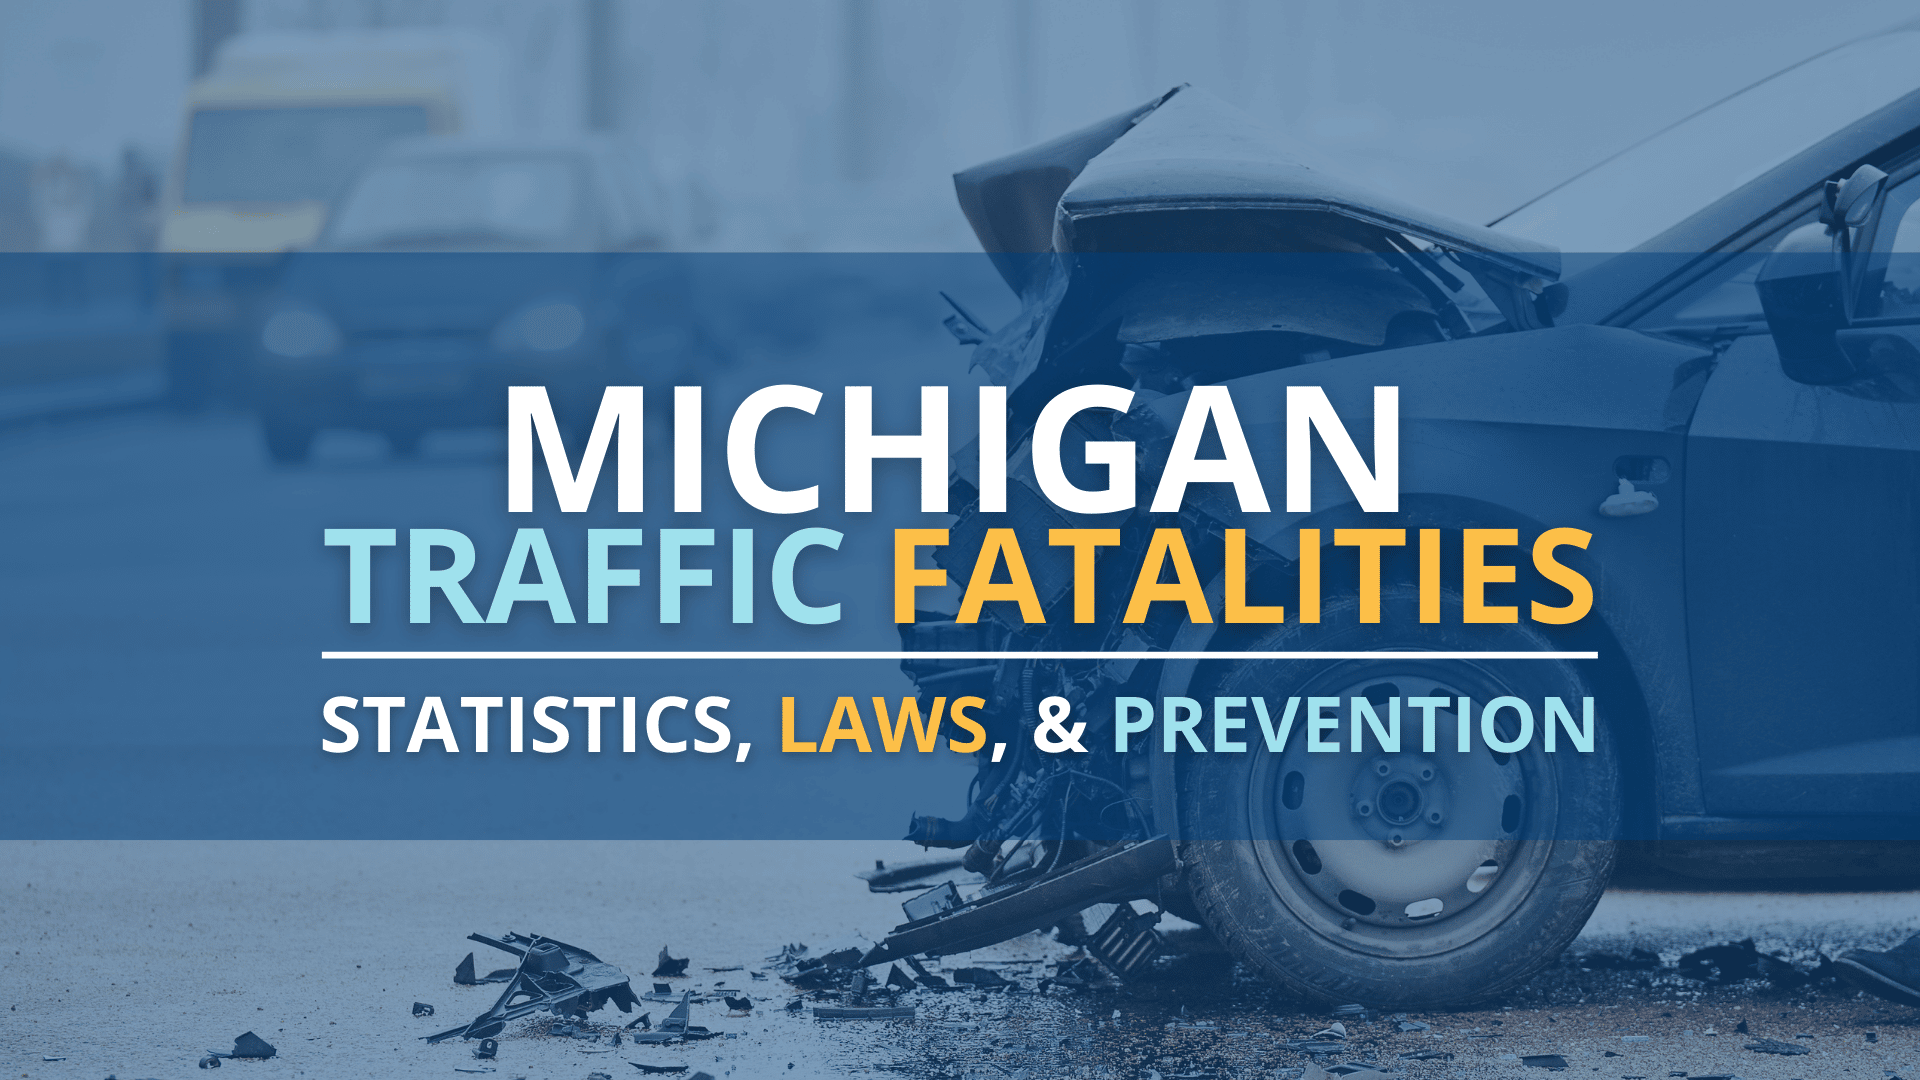 Michigan Traffic Fatalities, Statistics, Laws, and Prevention